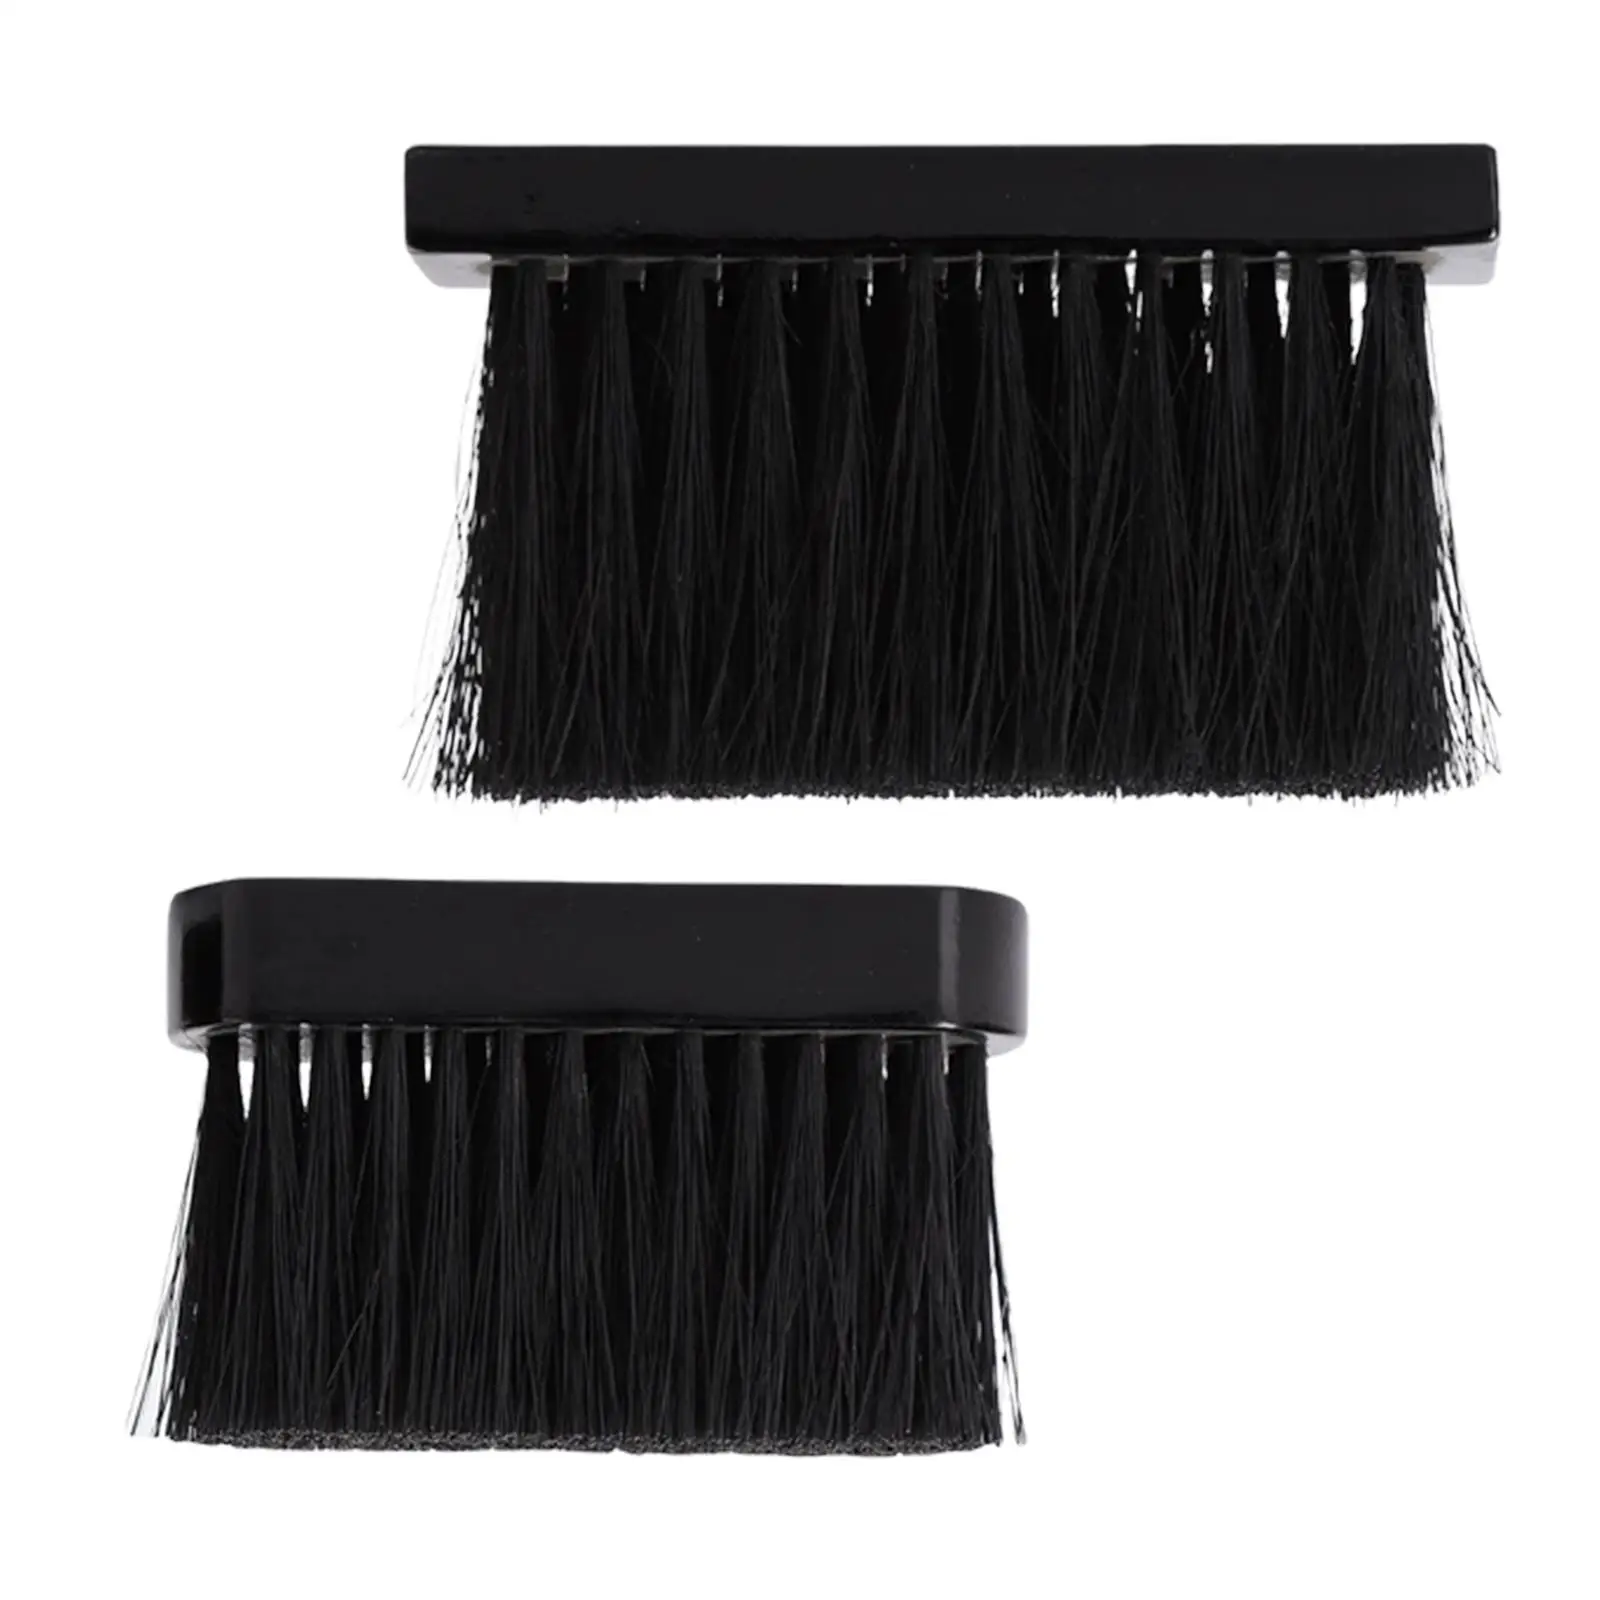 Set of 2 Fireplace Brush with Wooden Handle Durable Refill for Hearths